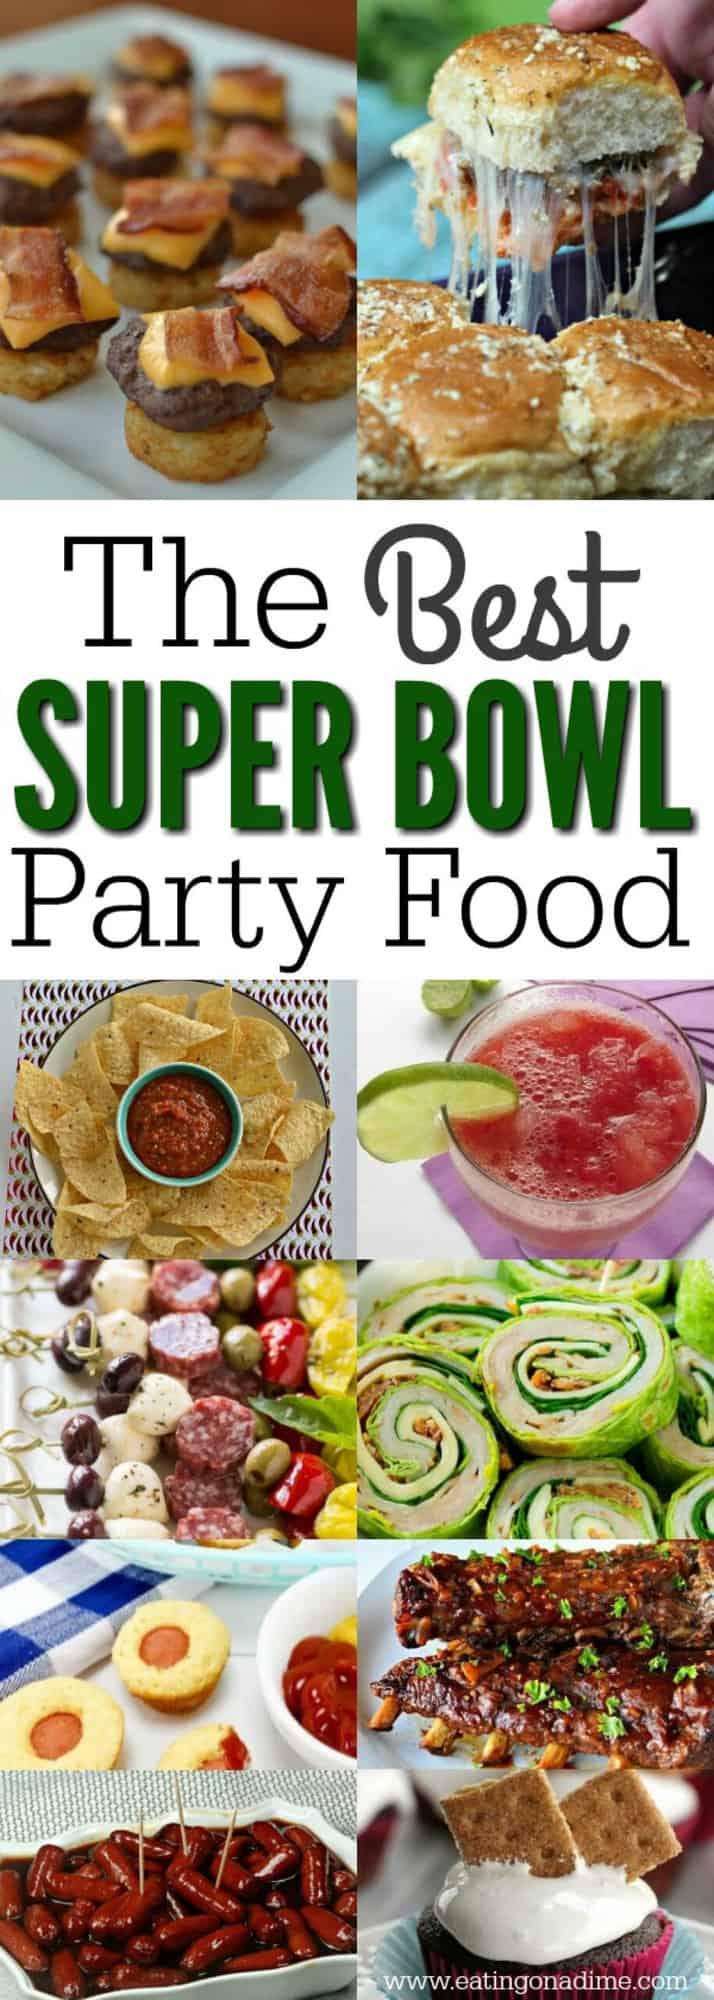 Whether you watch the game or just come for the food, we have the best super bowl food to try. Choose from 75 delicious ideas.